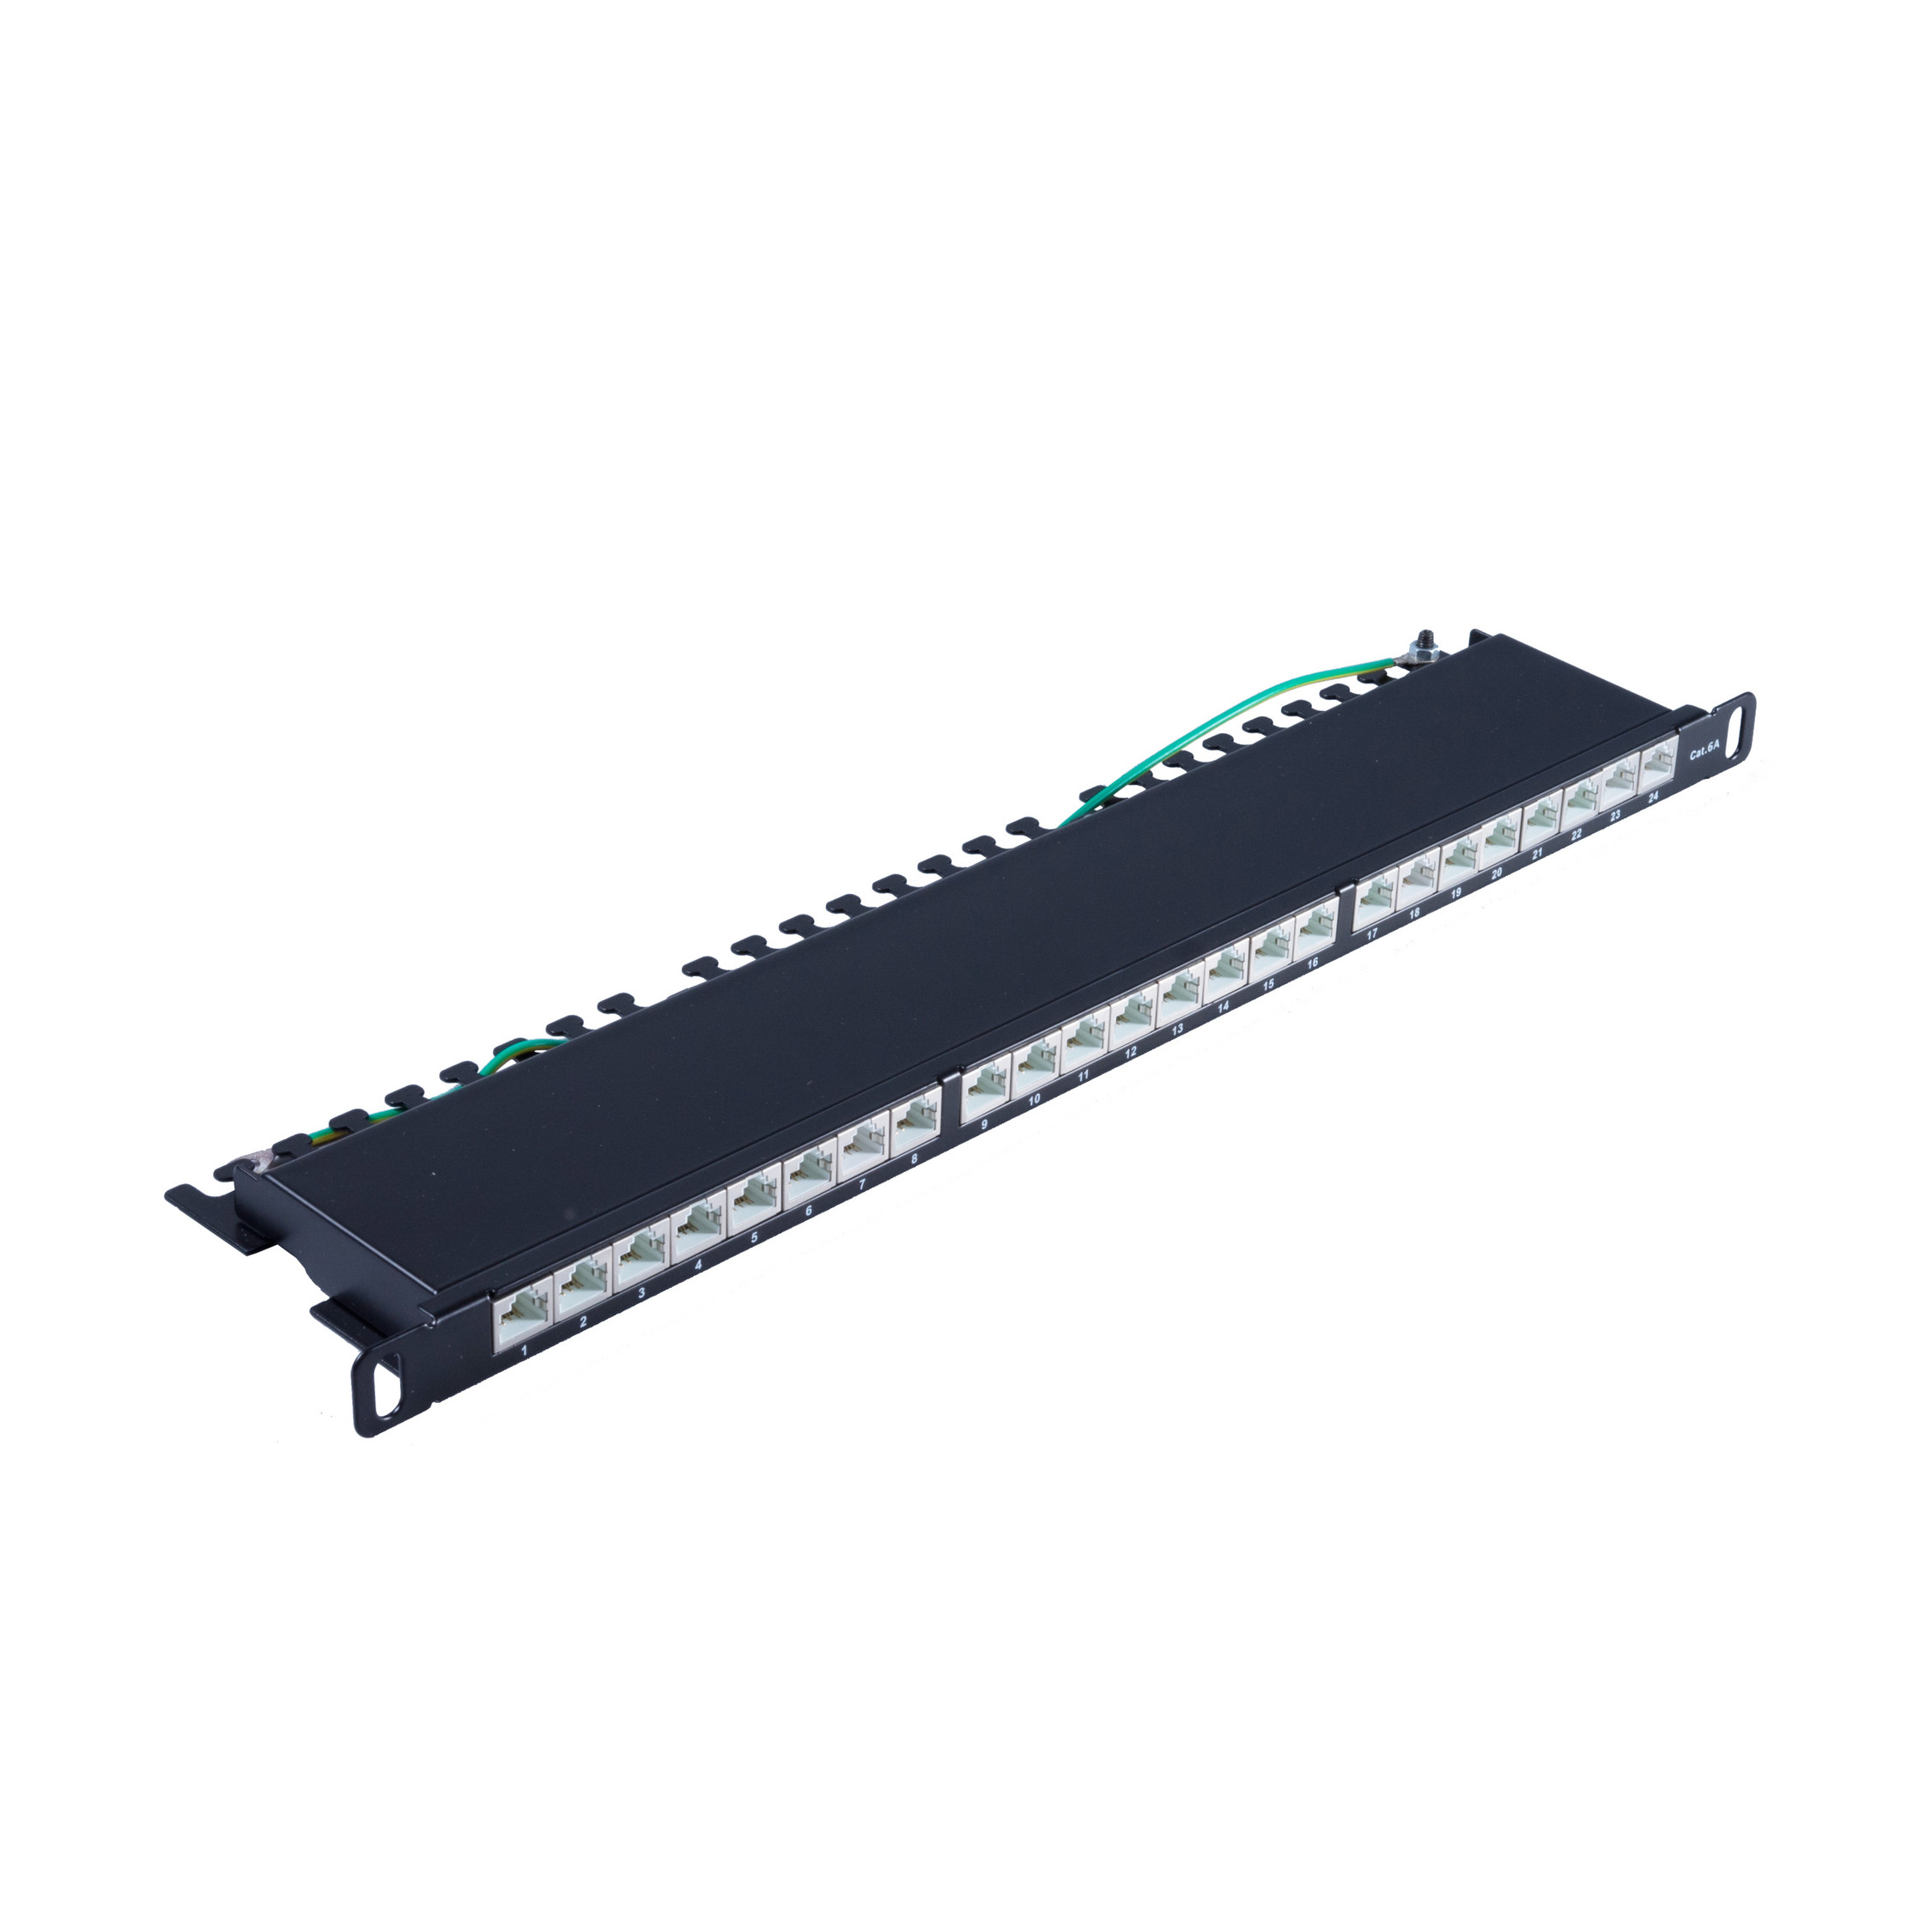 SHIVERPEAKS Slim Patchpanel 24 Port 19” Patchpanel Cat.6A, 0,5HE